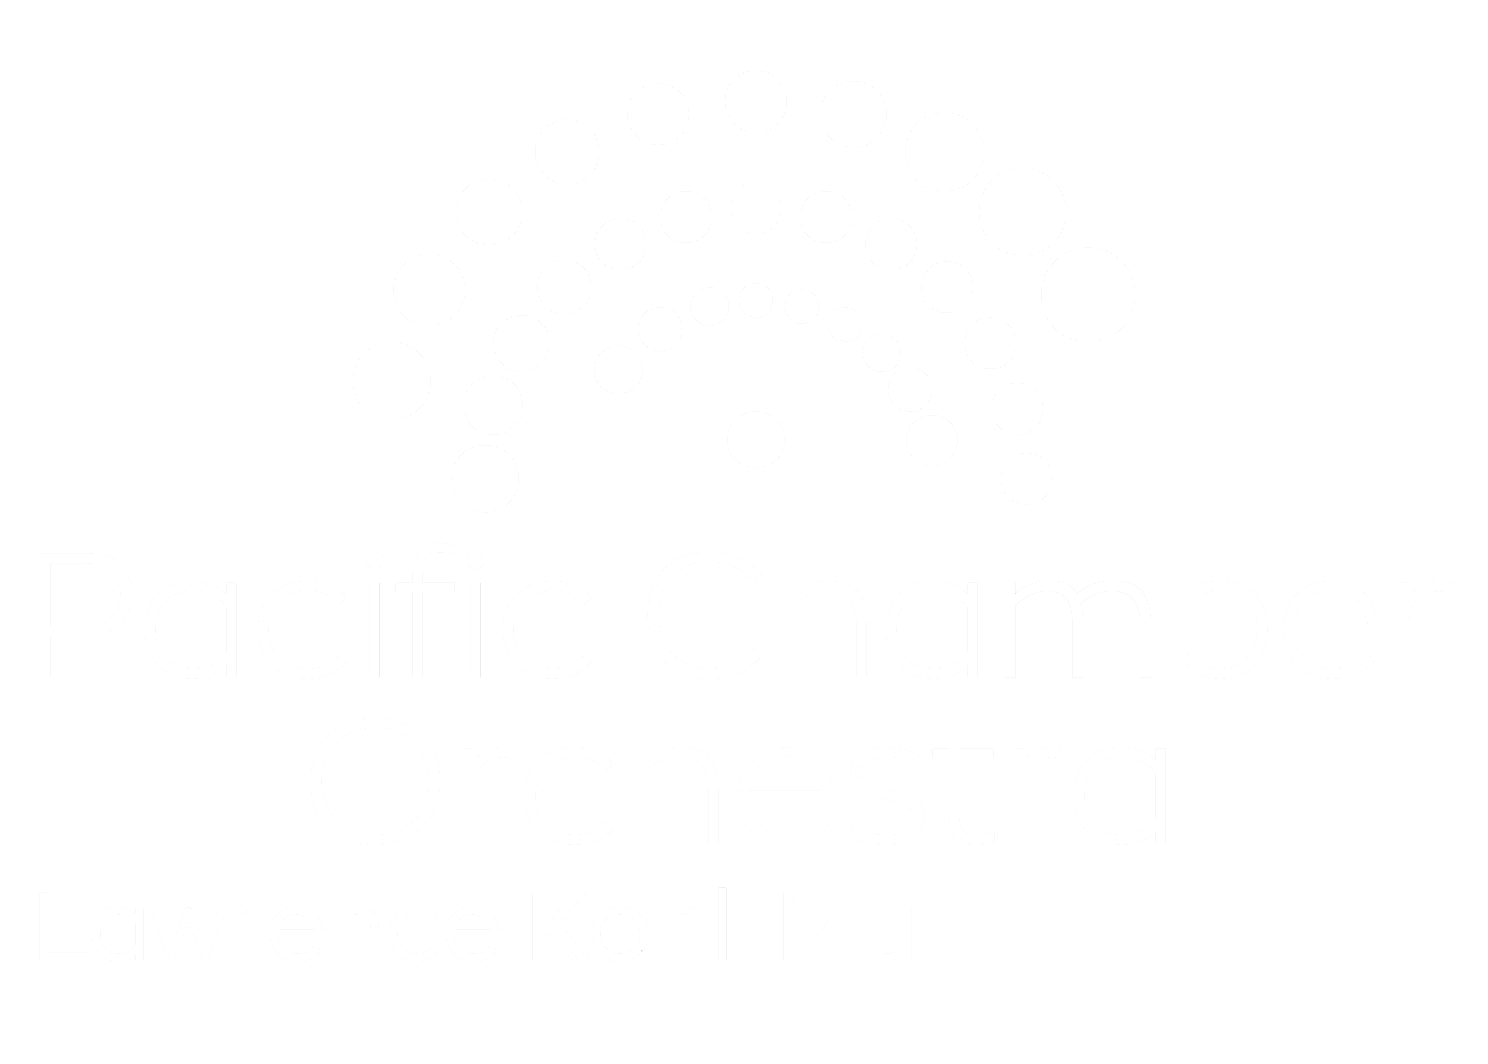 Pacific Chamber Orchestra logo